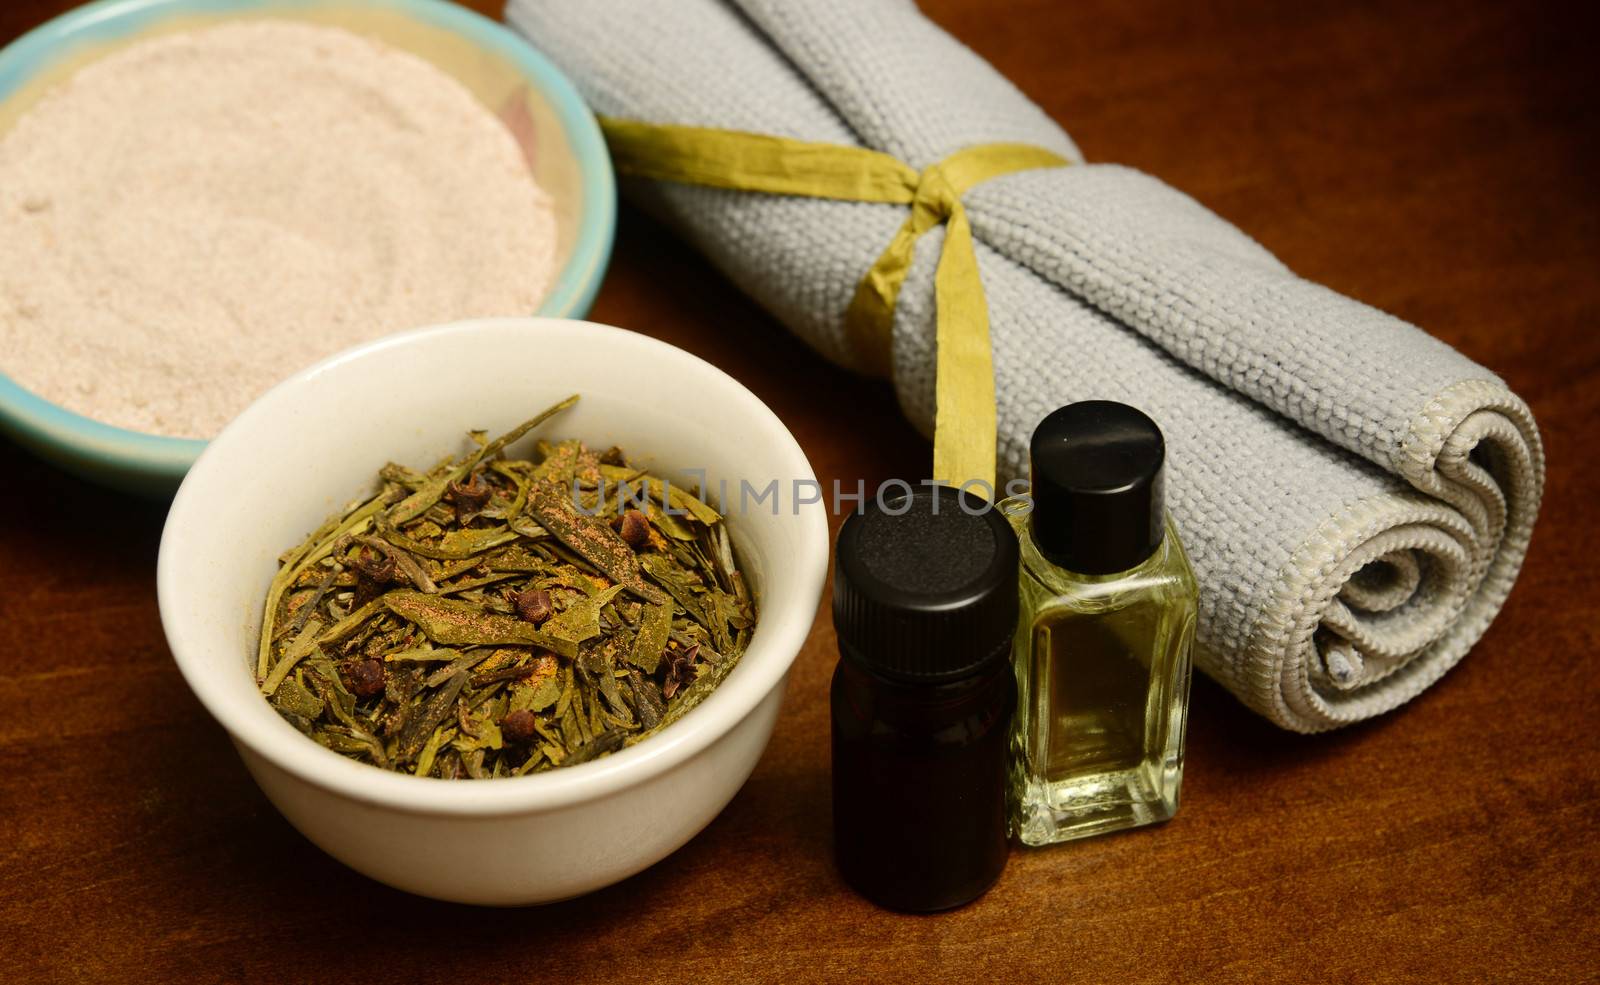 essential oils and herbs for spa treatment by ftlaudgirl